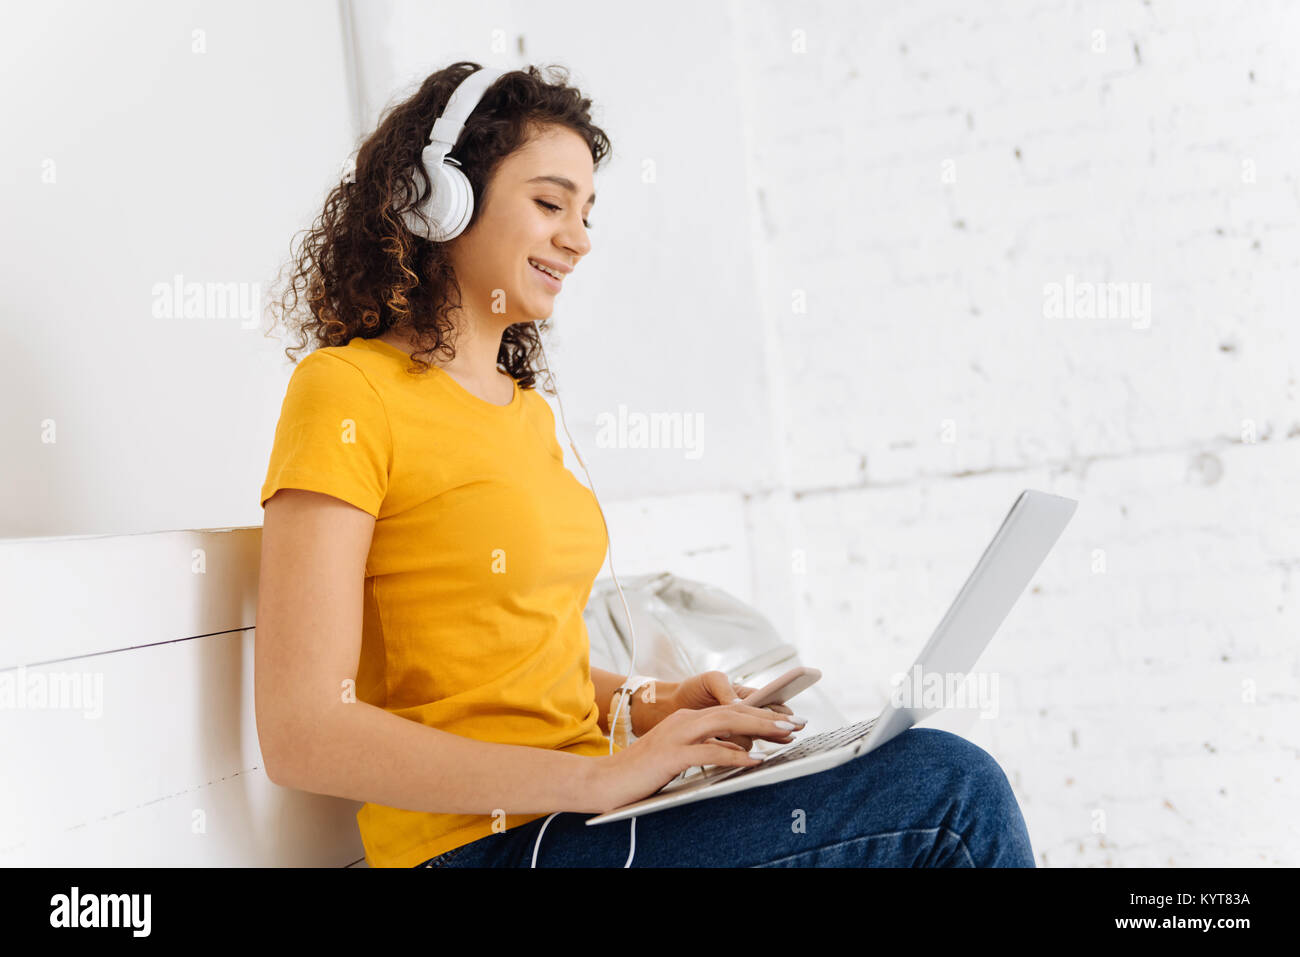 Relaxed girl having online conversation Stock Photo